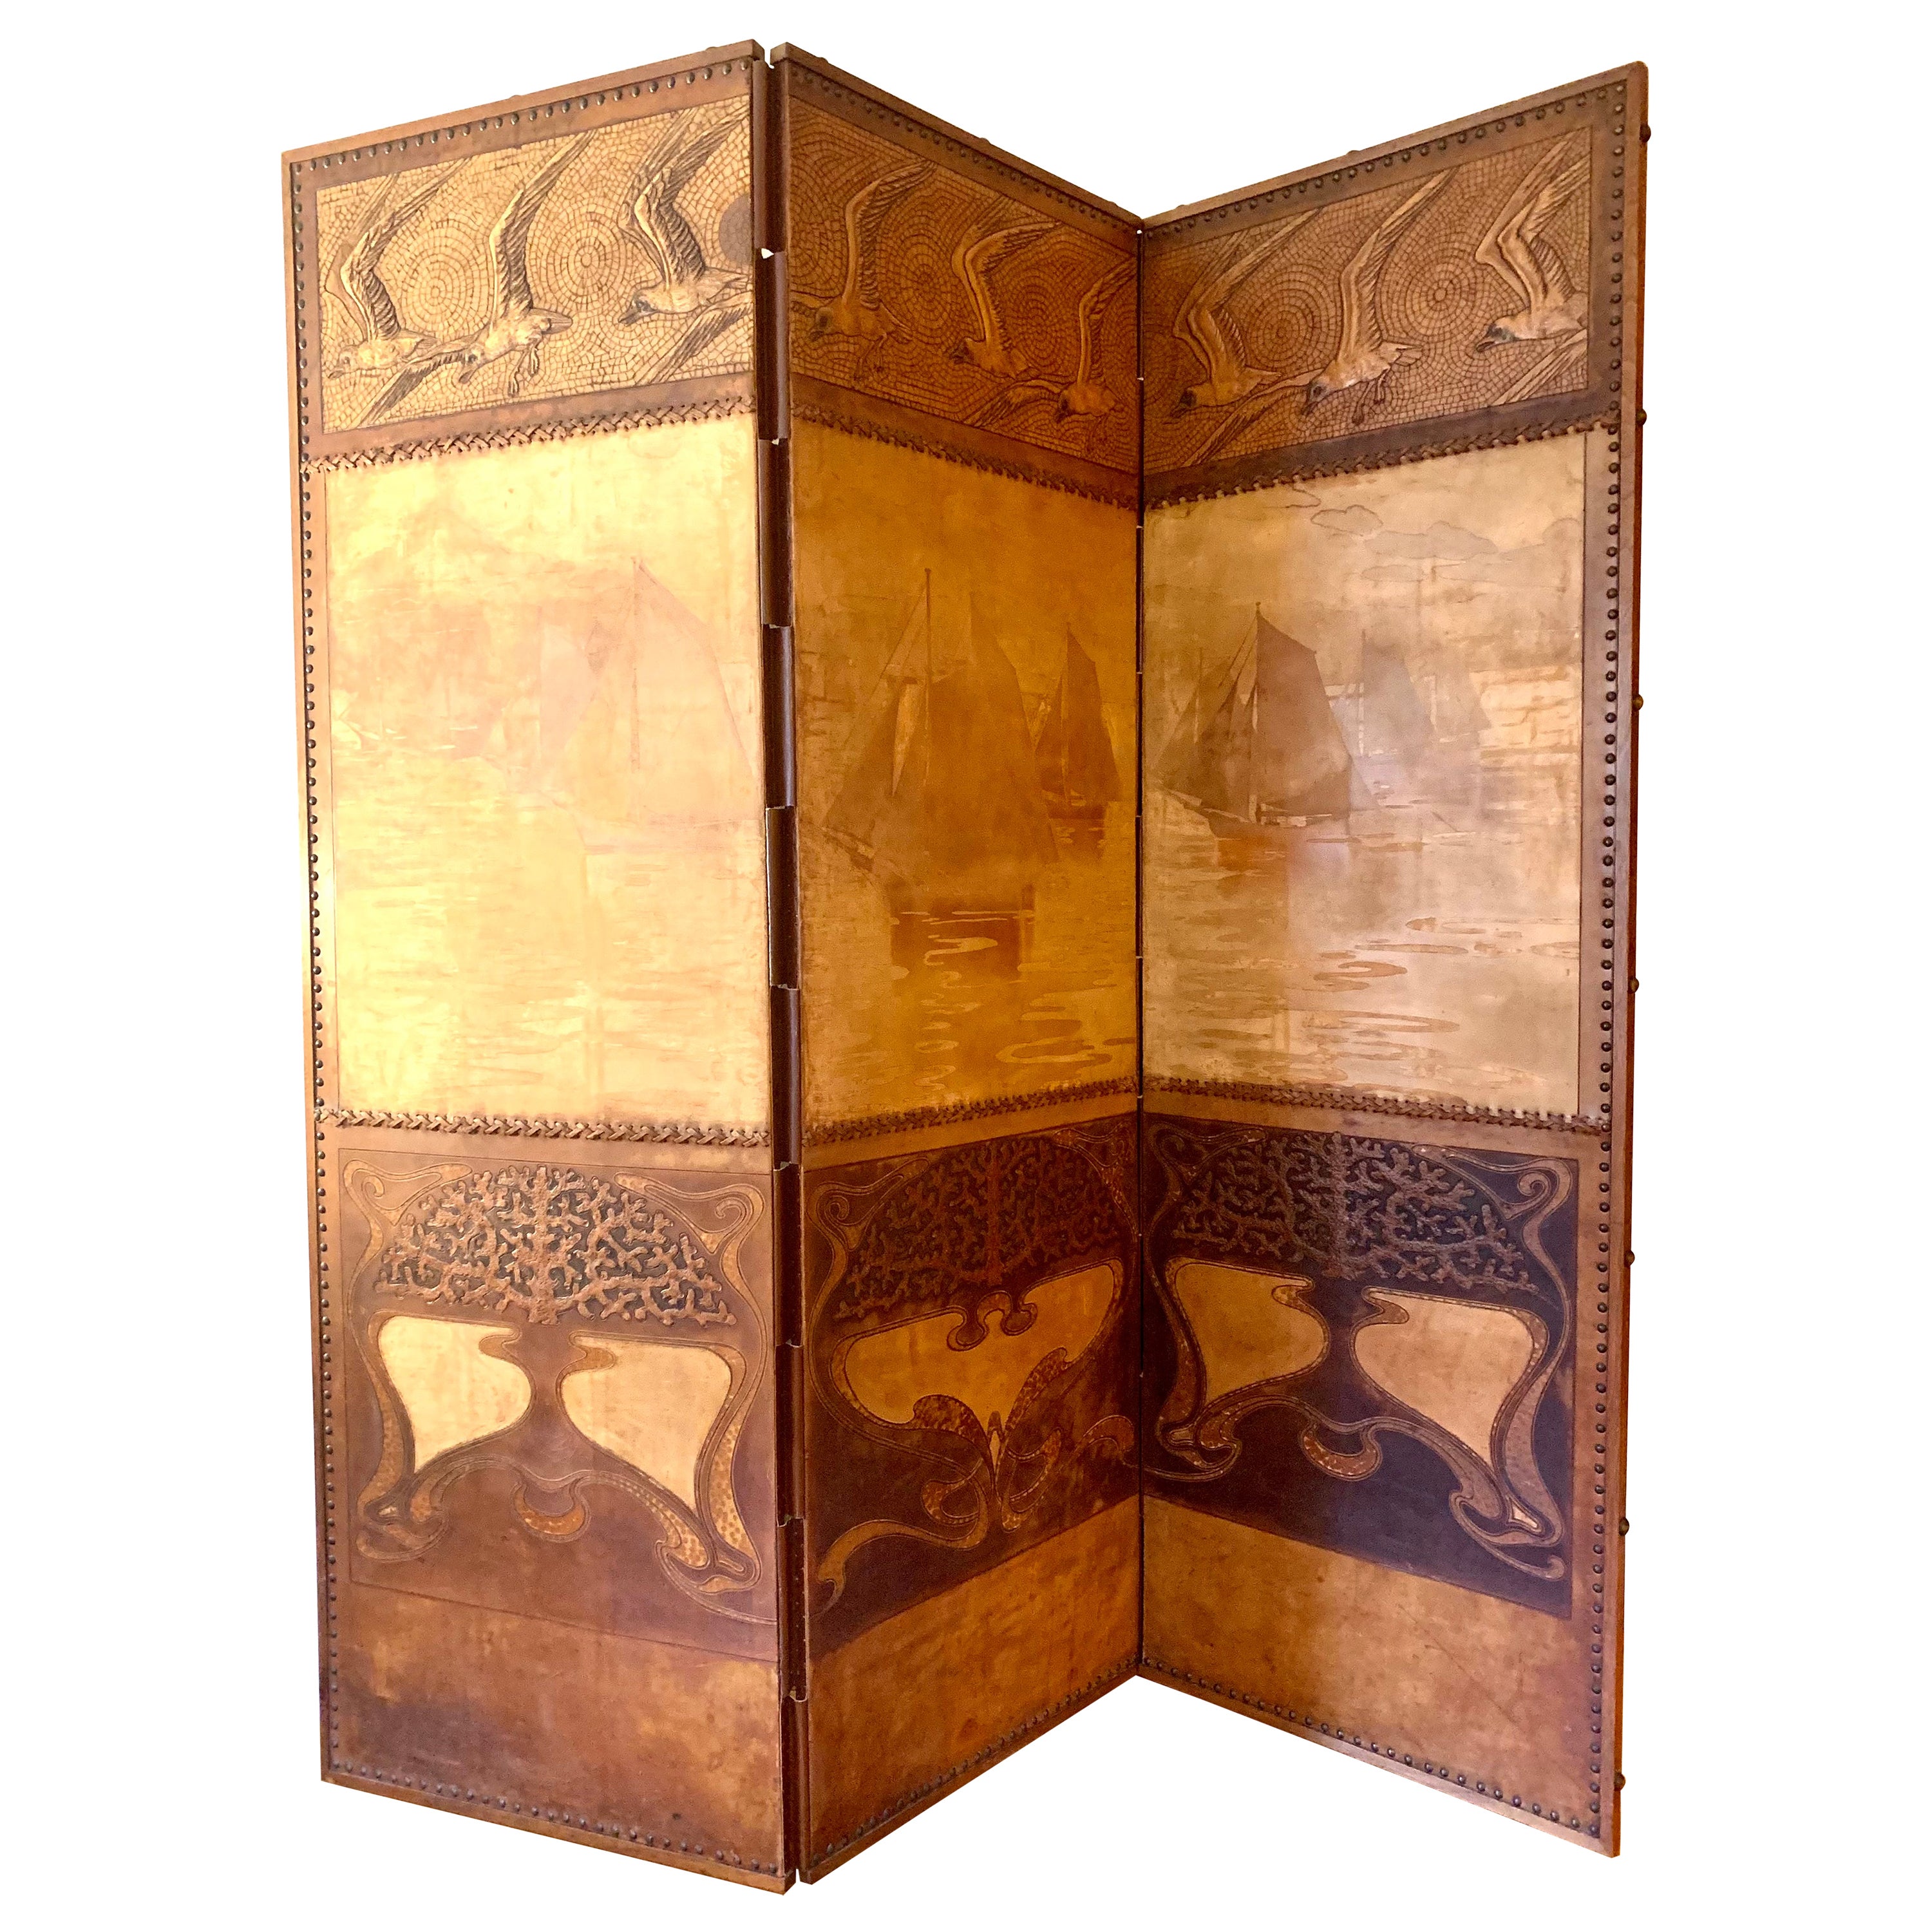 Art Nouveau Georg Hulbe Tooled Leather Three Panel Screen, Sailboat Motif, 1900 For Sale